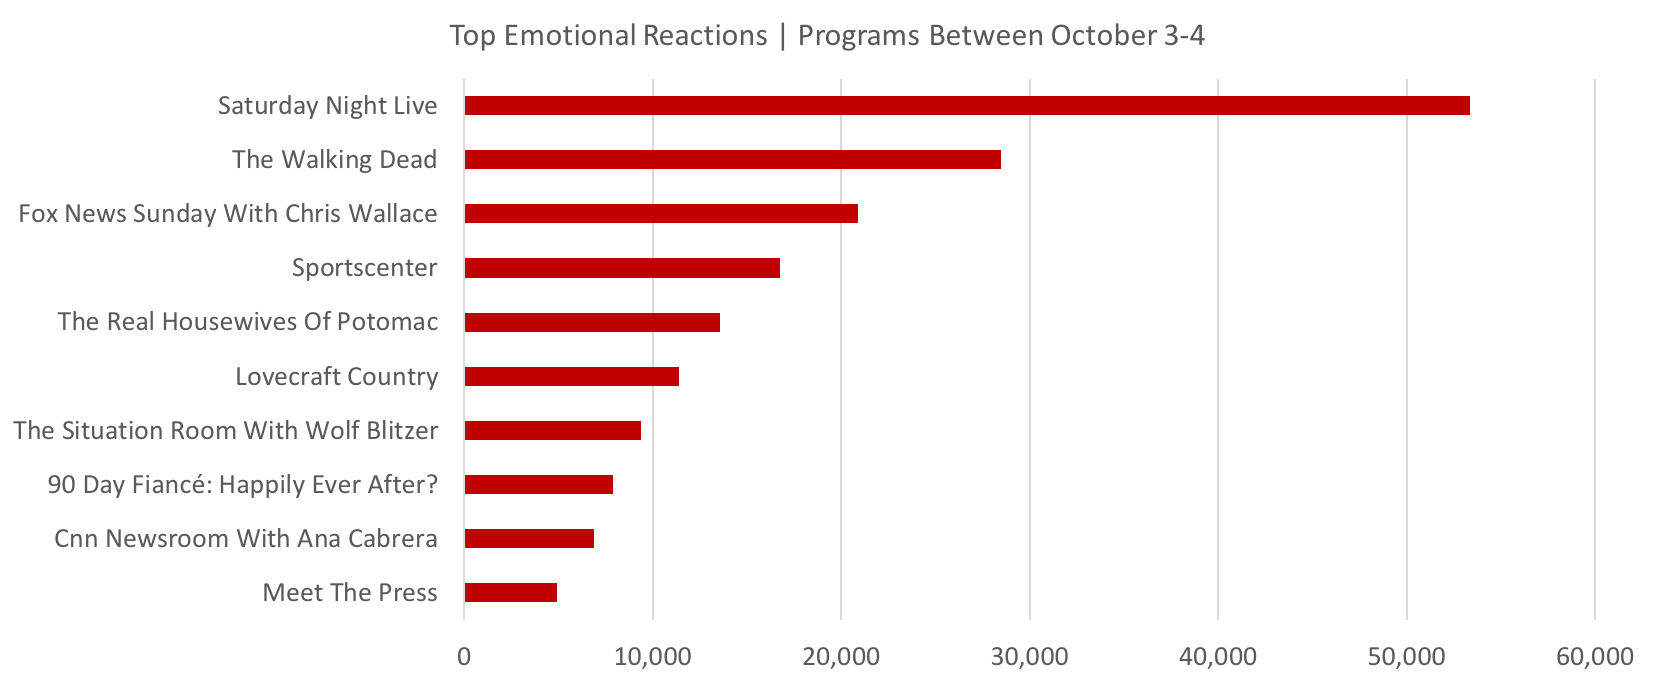 Source: Canvs Explore, Emotional Reactions Across Programs from October 3 - 4